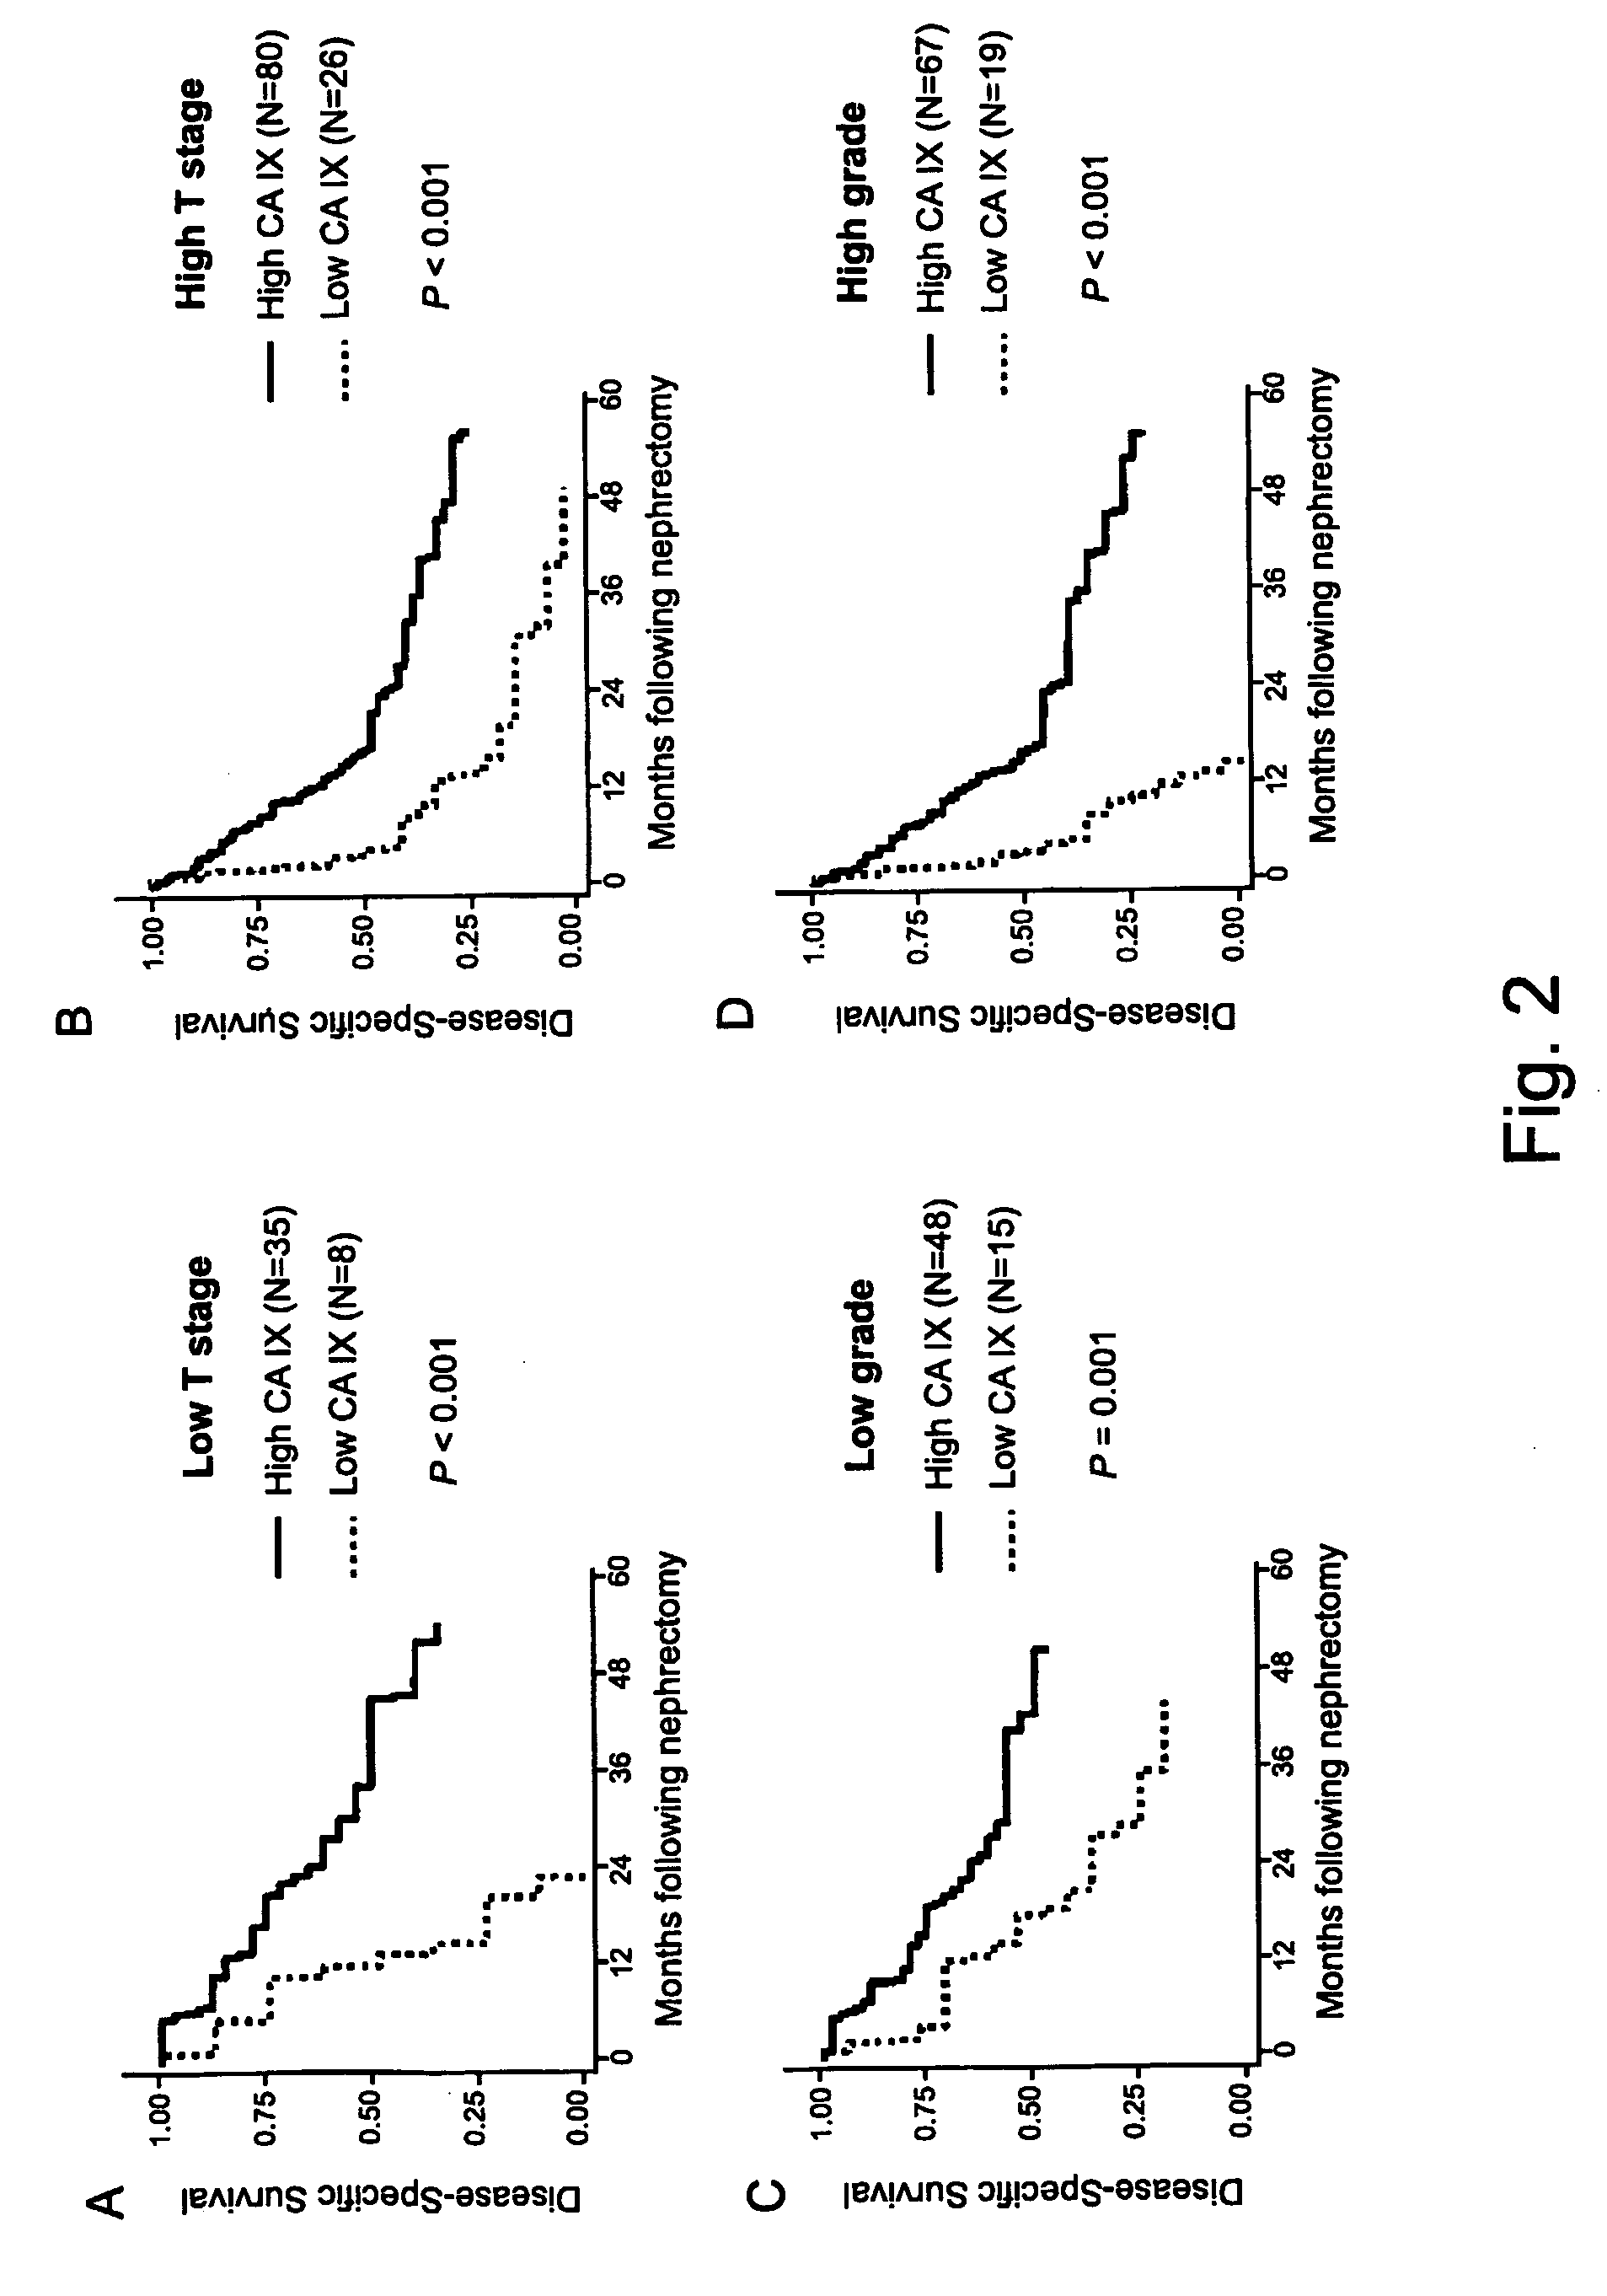 Methods of renal cell carcinoma prognosis and treatment selection with carbonic anhydrase IX